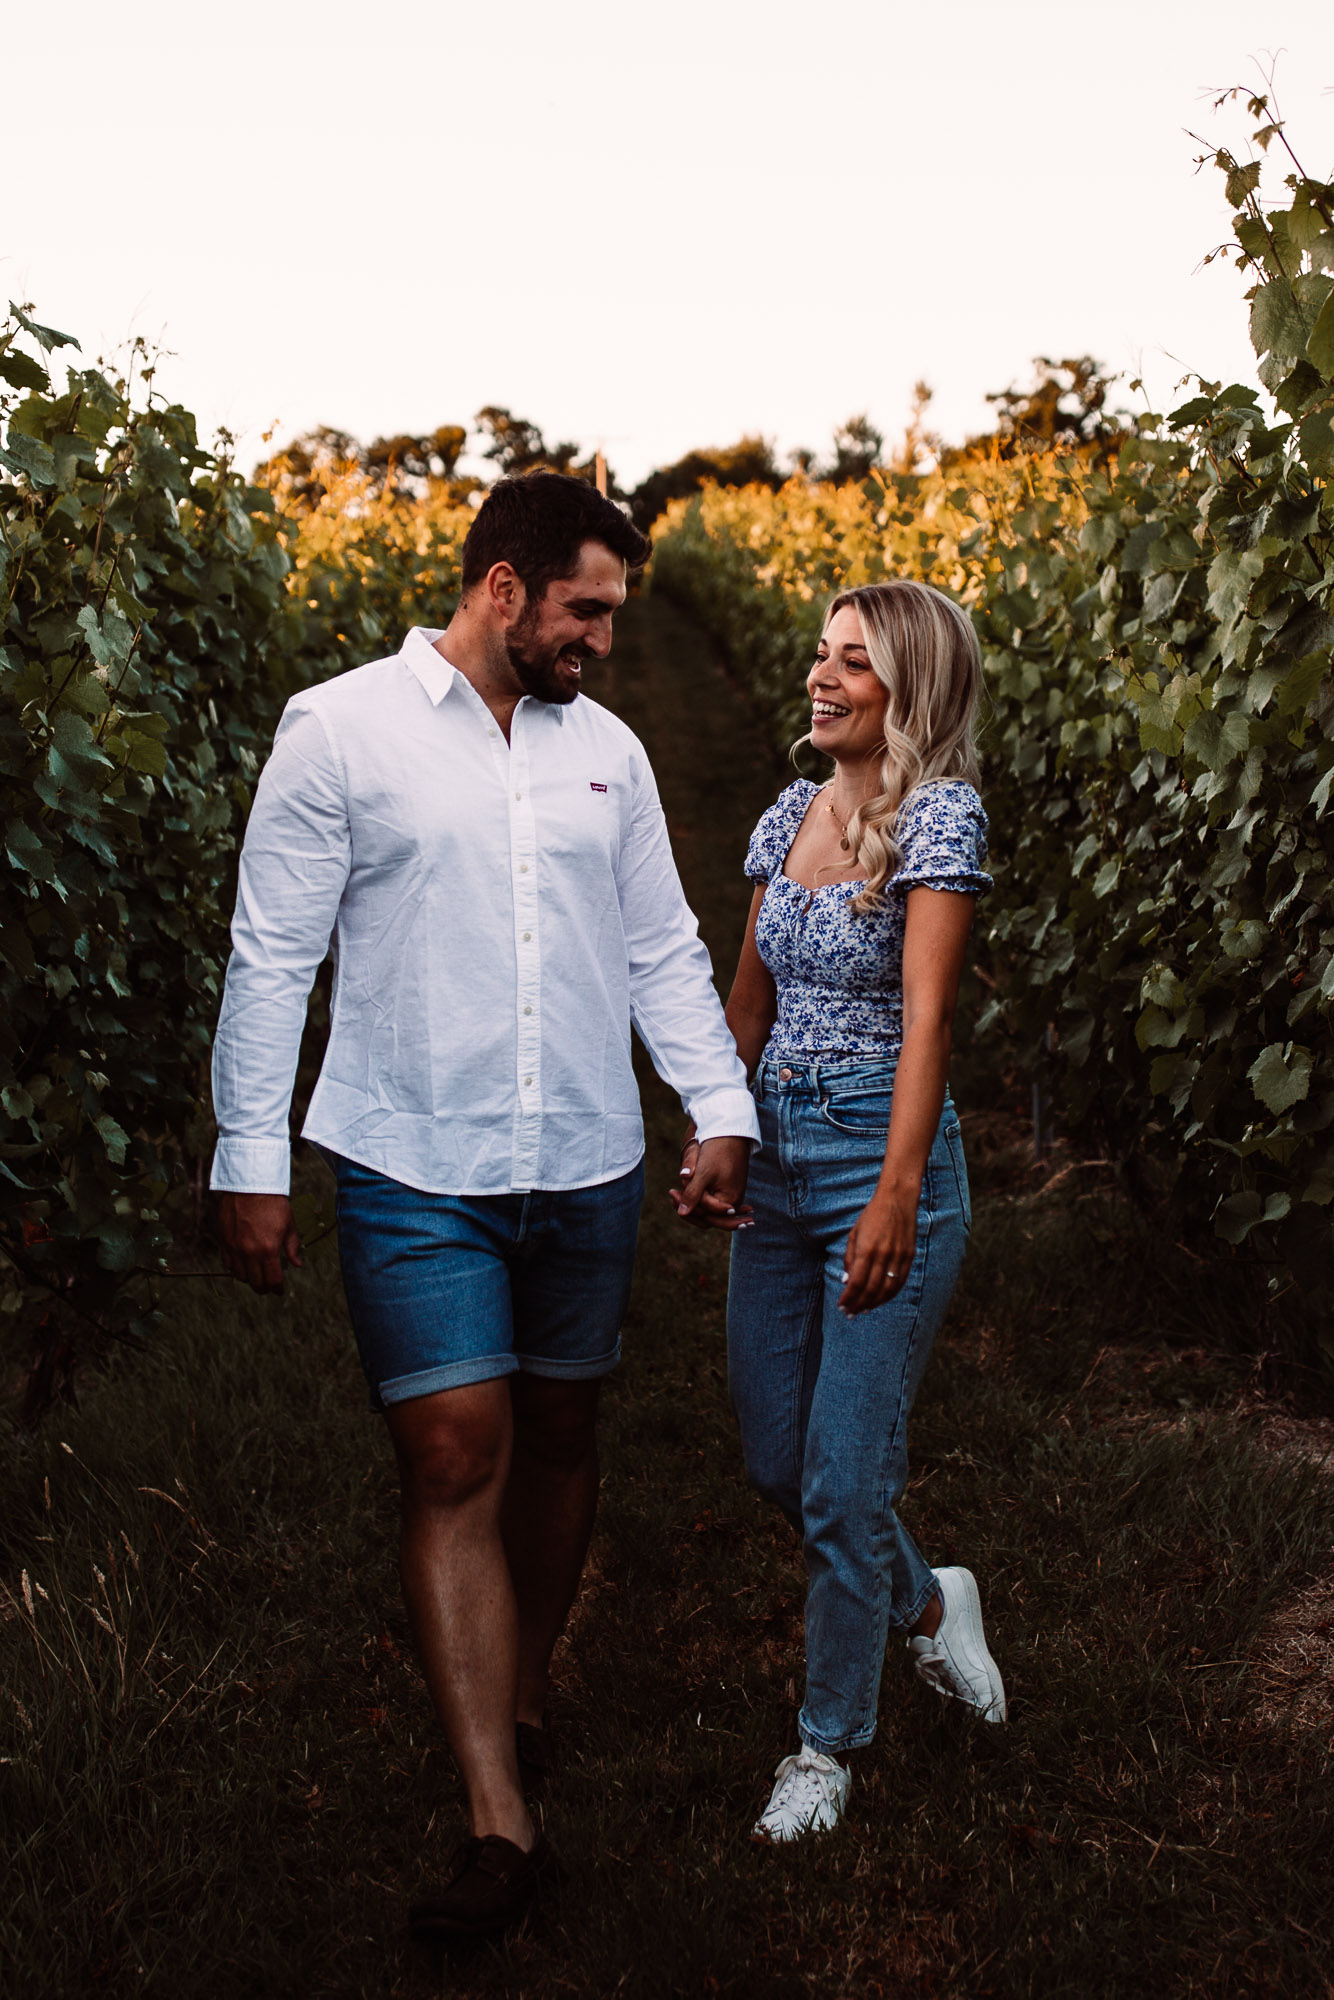 fiances holding hands walking through the vineyards laughing with one another